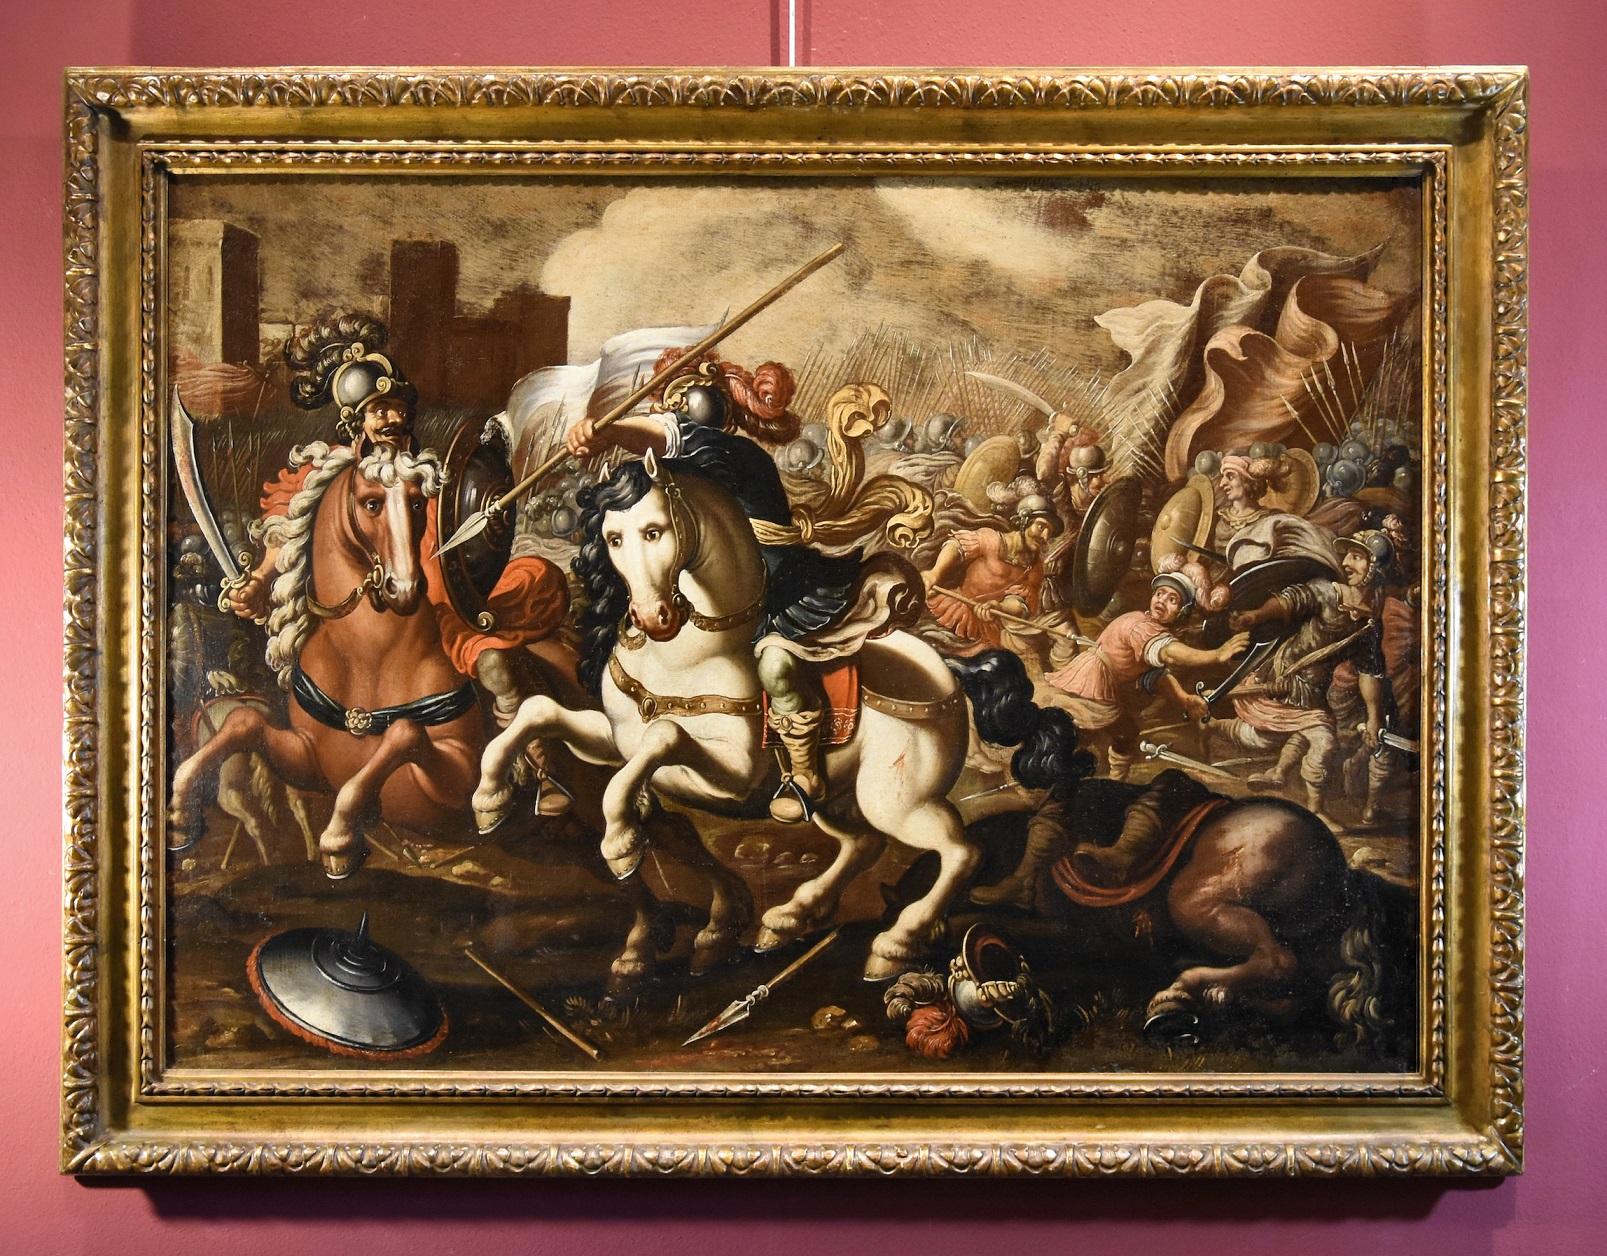 Battle Tempesta Knights Landscape 16/17 Century Oil on canvas Old master Italy - Painting by Antonio Tempesta (Florence 1555 - Rome 1630)